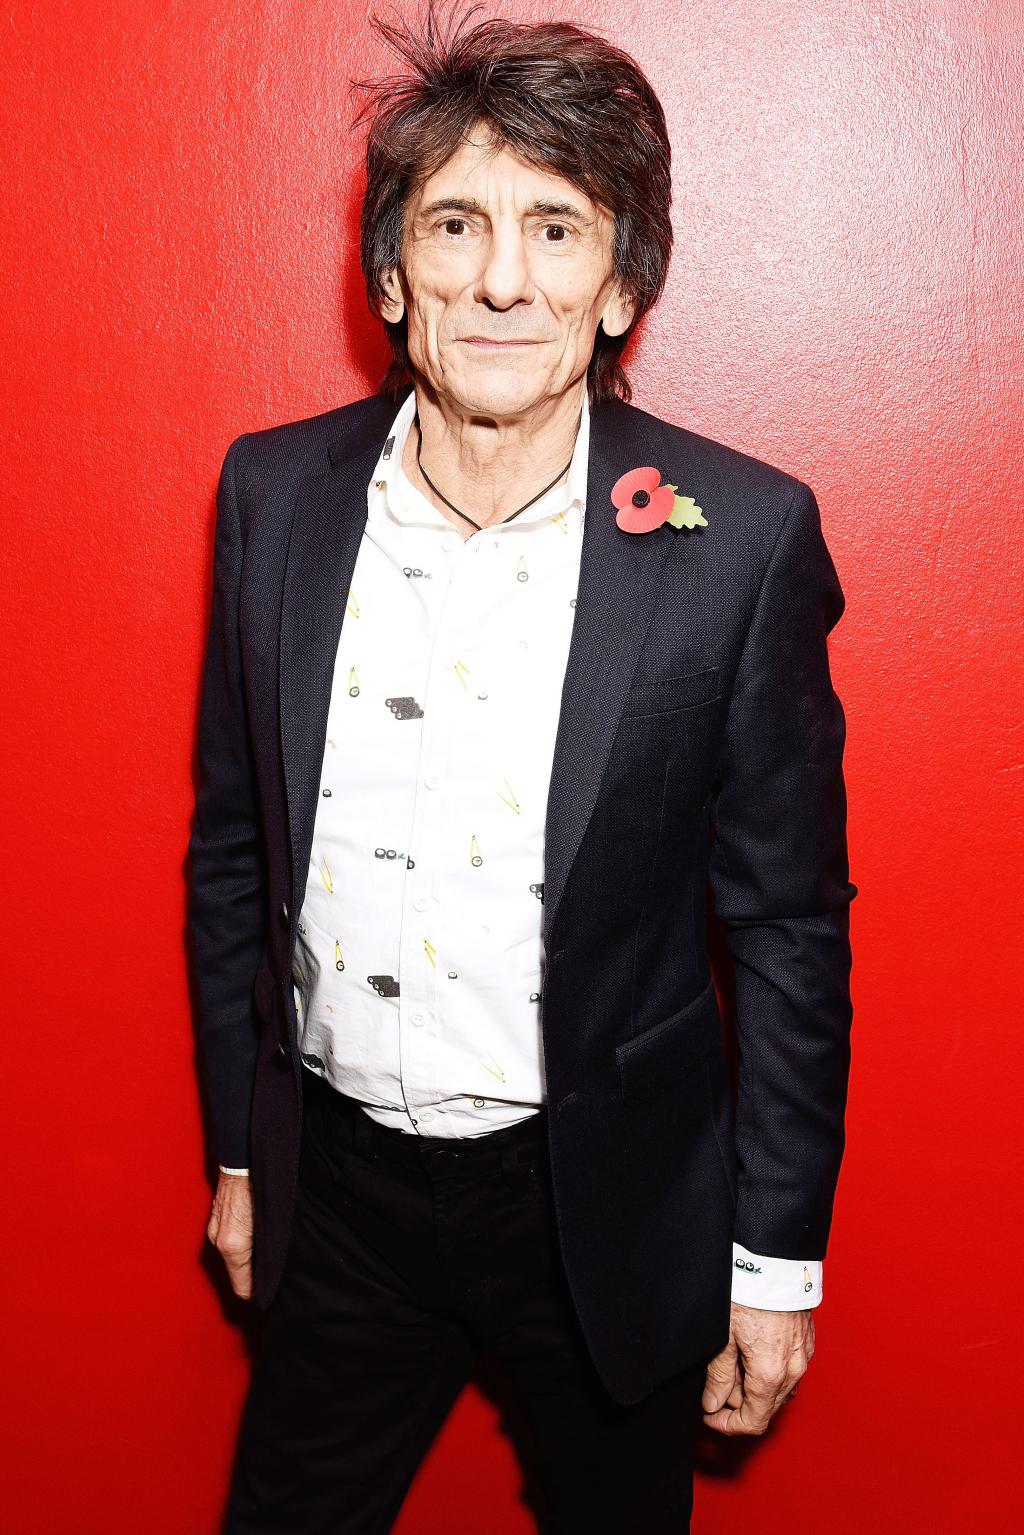 The Rolling Stonesâ€™ Ronnie Wood Reveals He Had a â€˜Touchâ€™ of Lung Cancer: â€˜It Could Have BeenÂ Curtainsâ€™